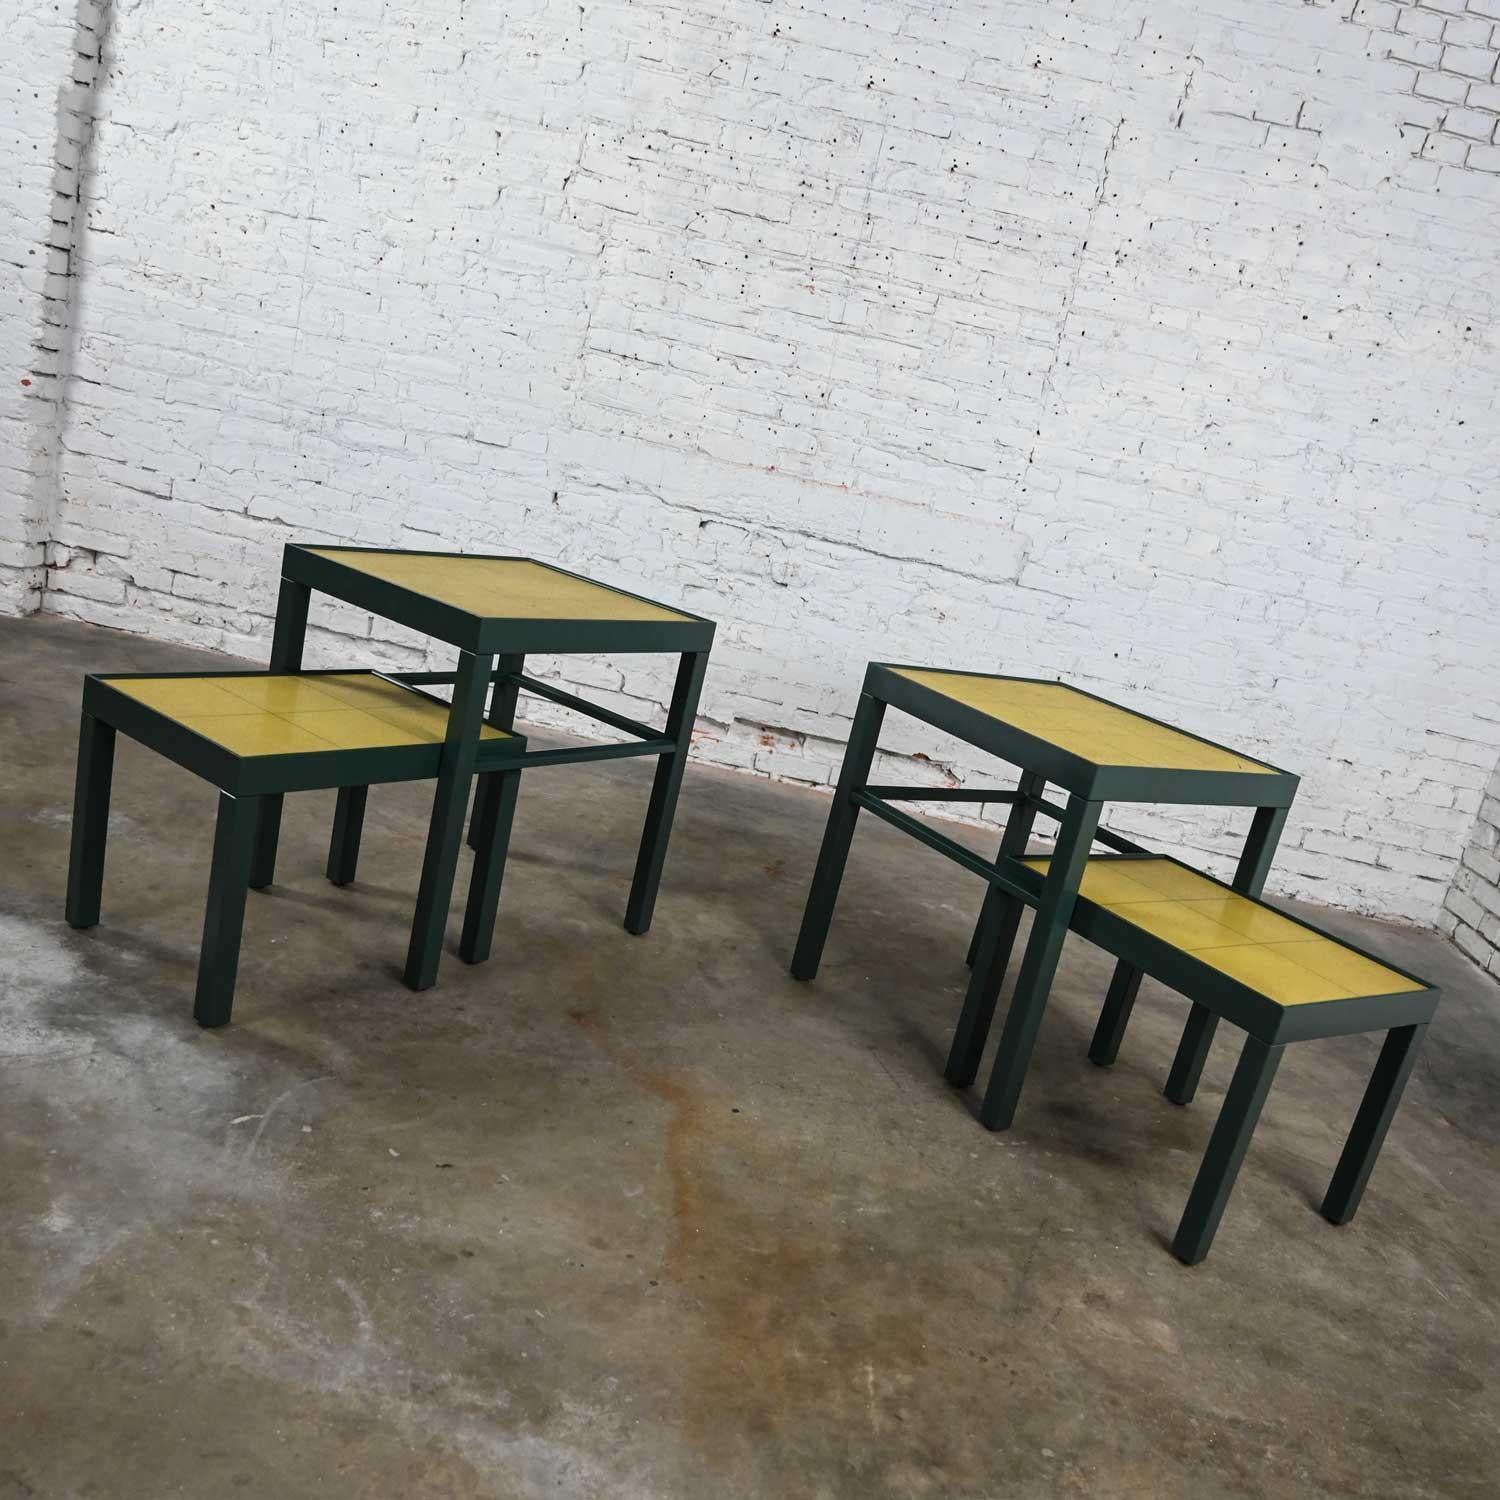 20th Century Vintage Campaign Nesting Tables Chartreuse Leather Tops 2 Sets of 2 by Kittinger